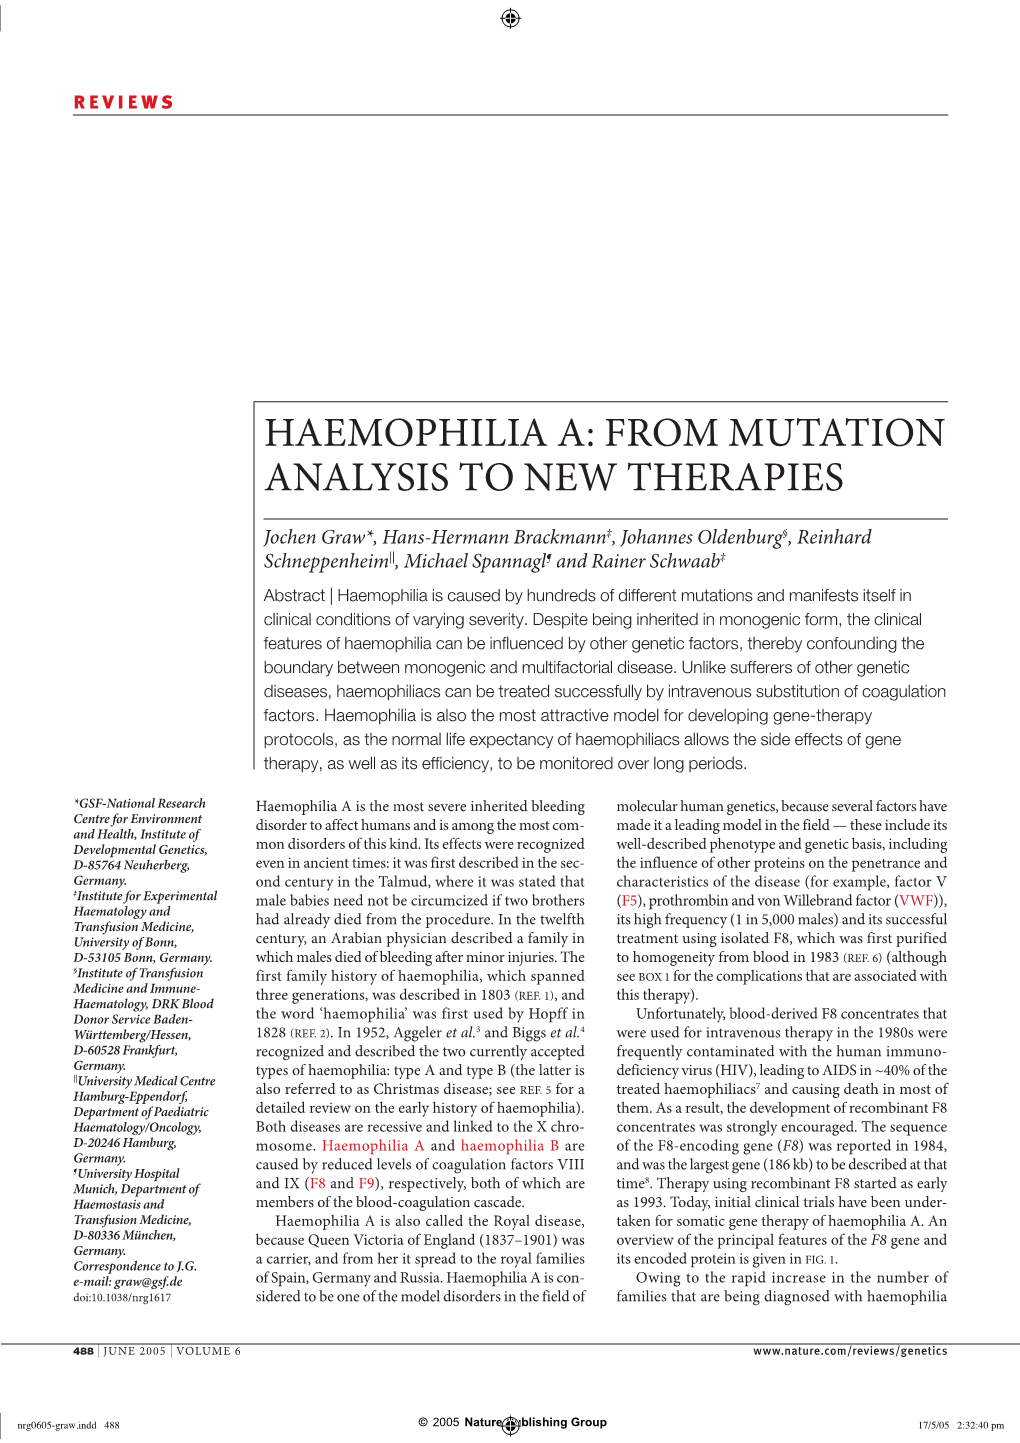 Haemophilia A: from Mutation Analysis to New Therapies